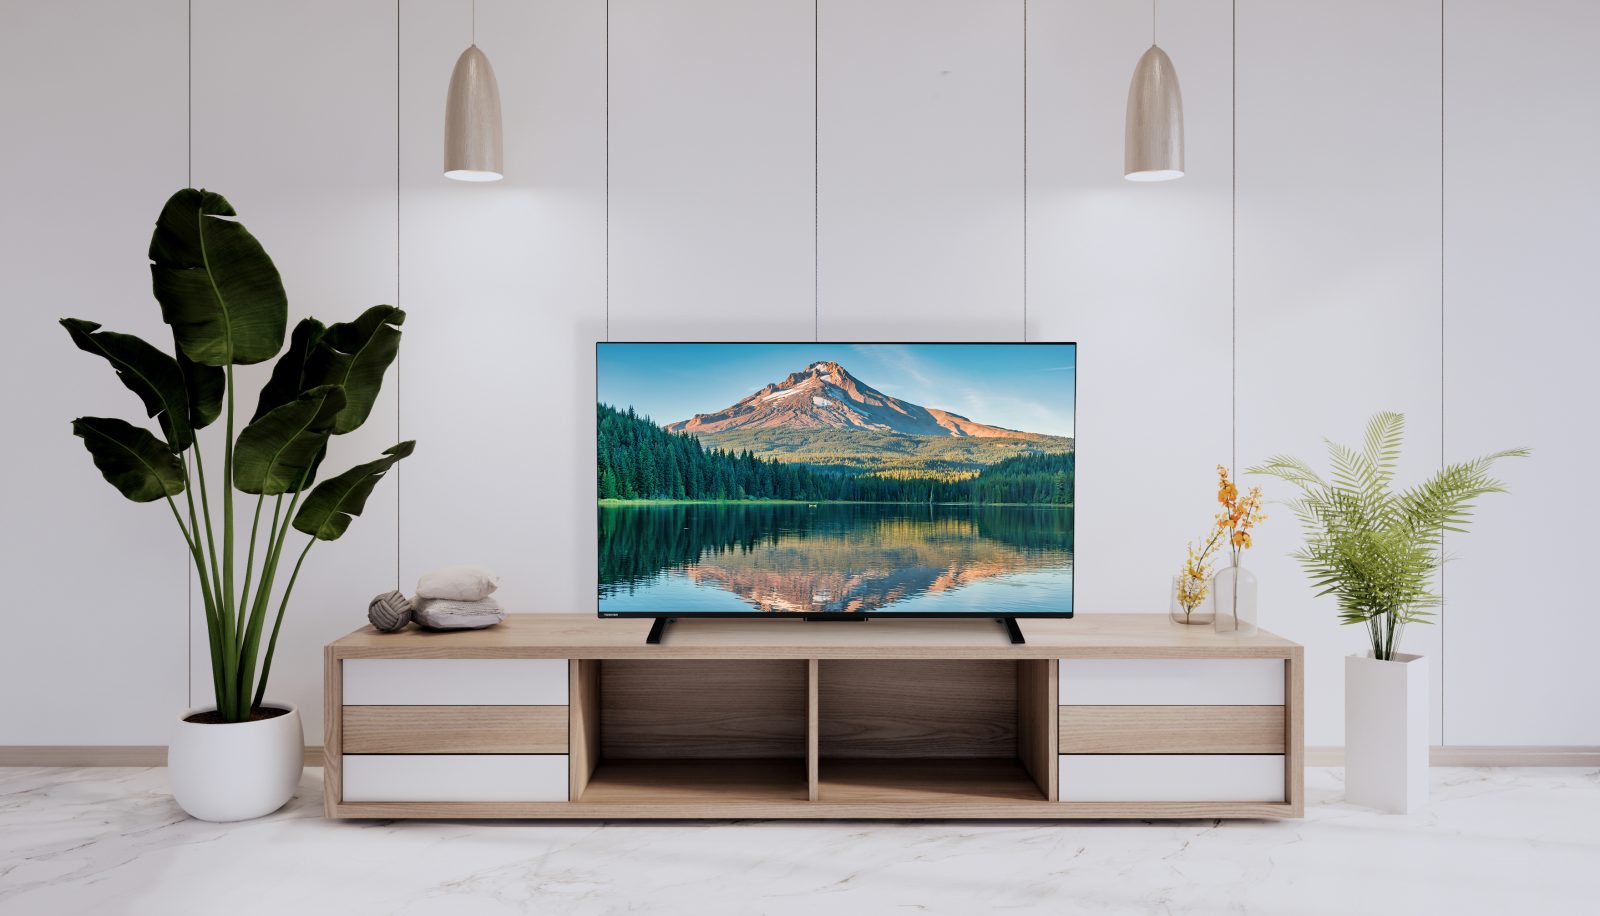 Toshiba TV presents the new series of QLED and OLED 4K smart TVs